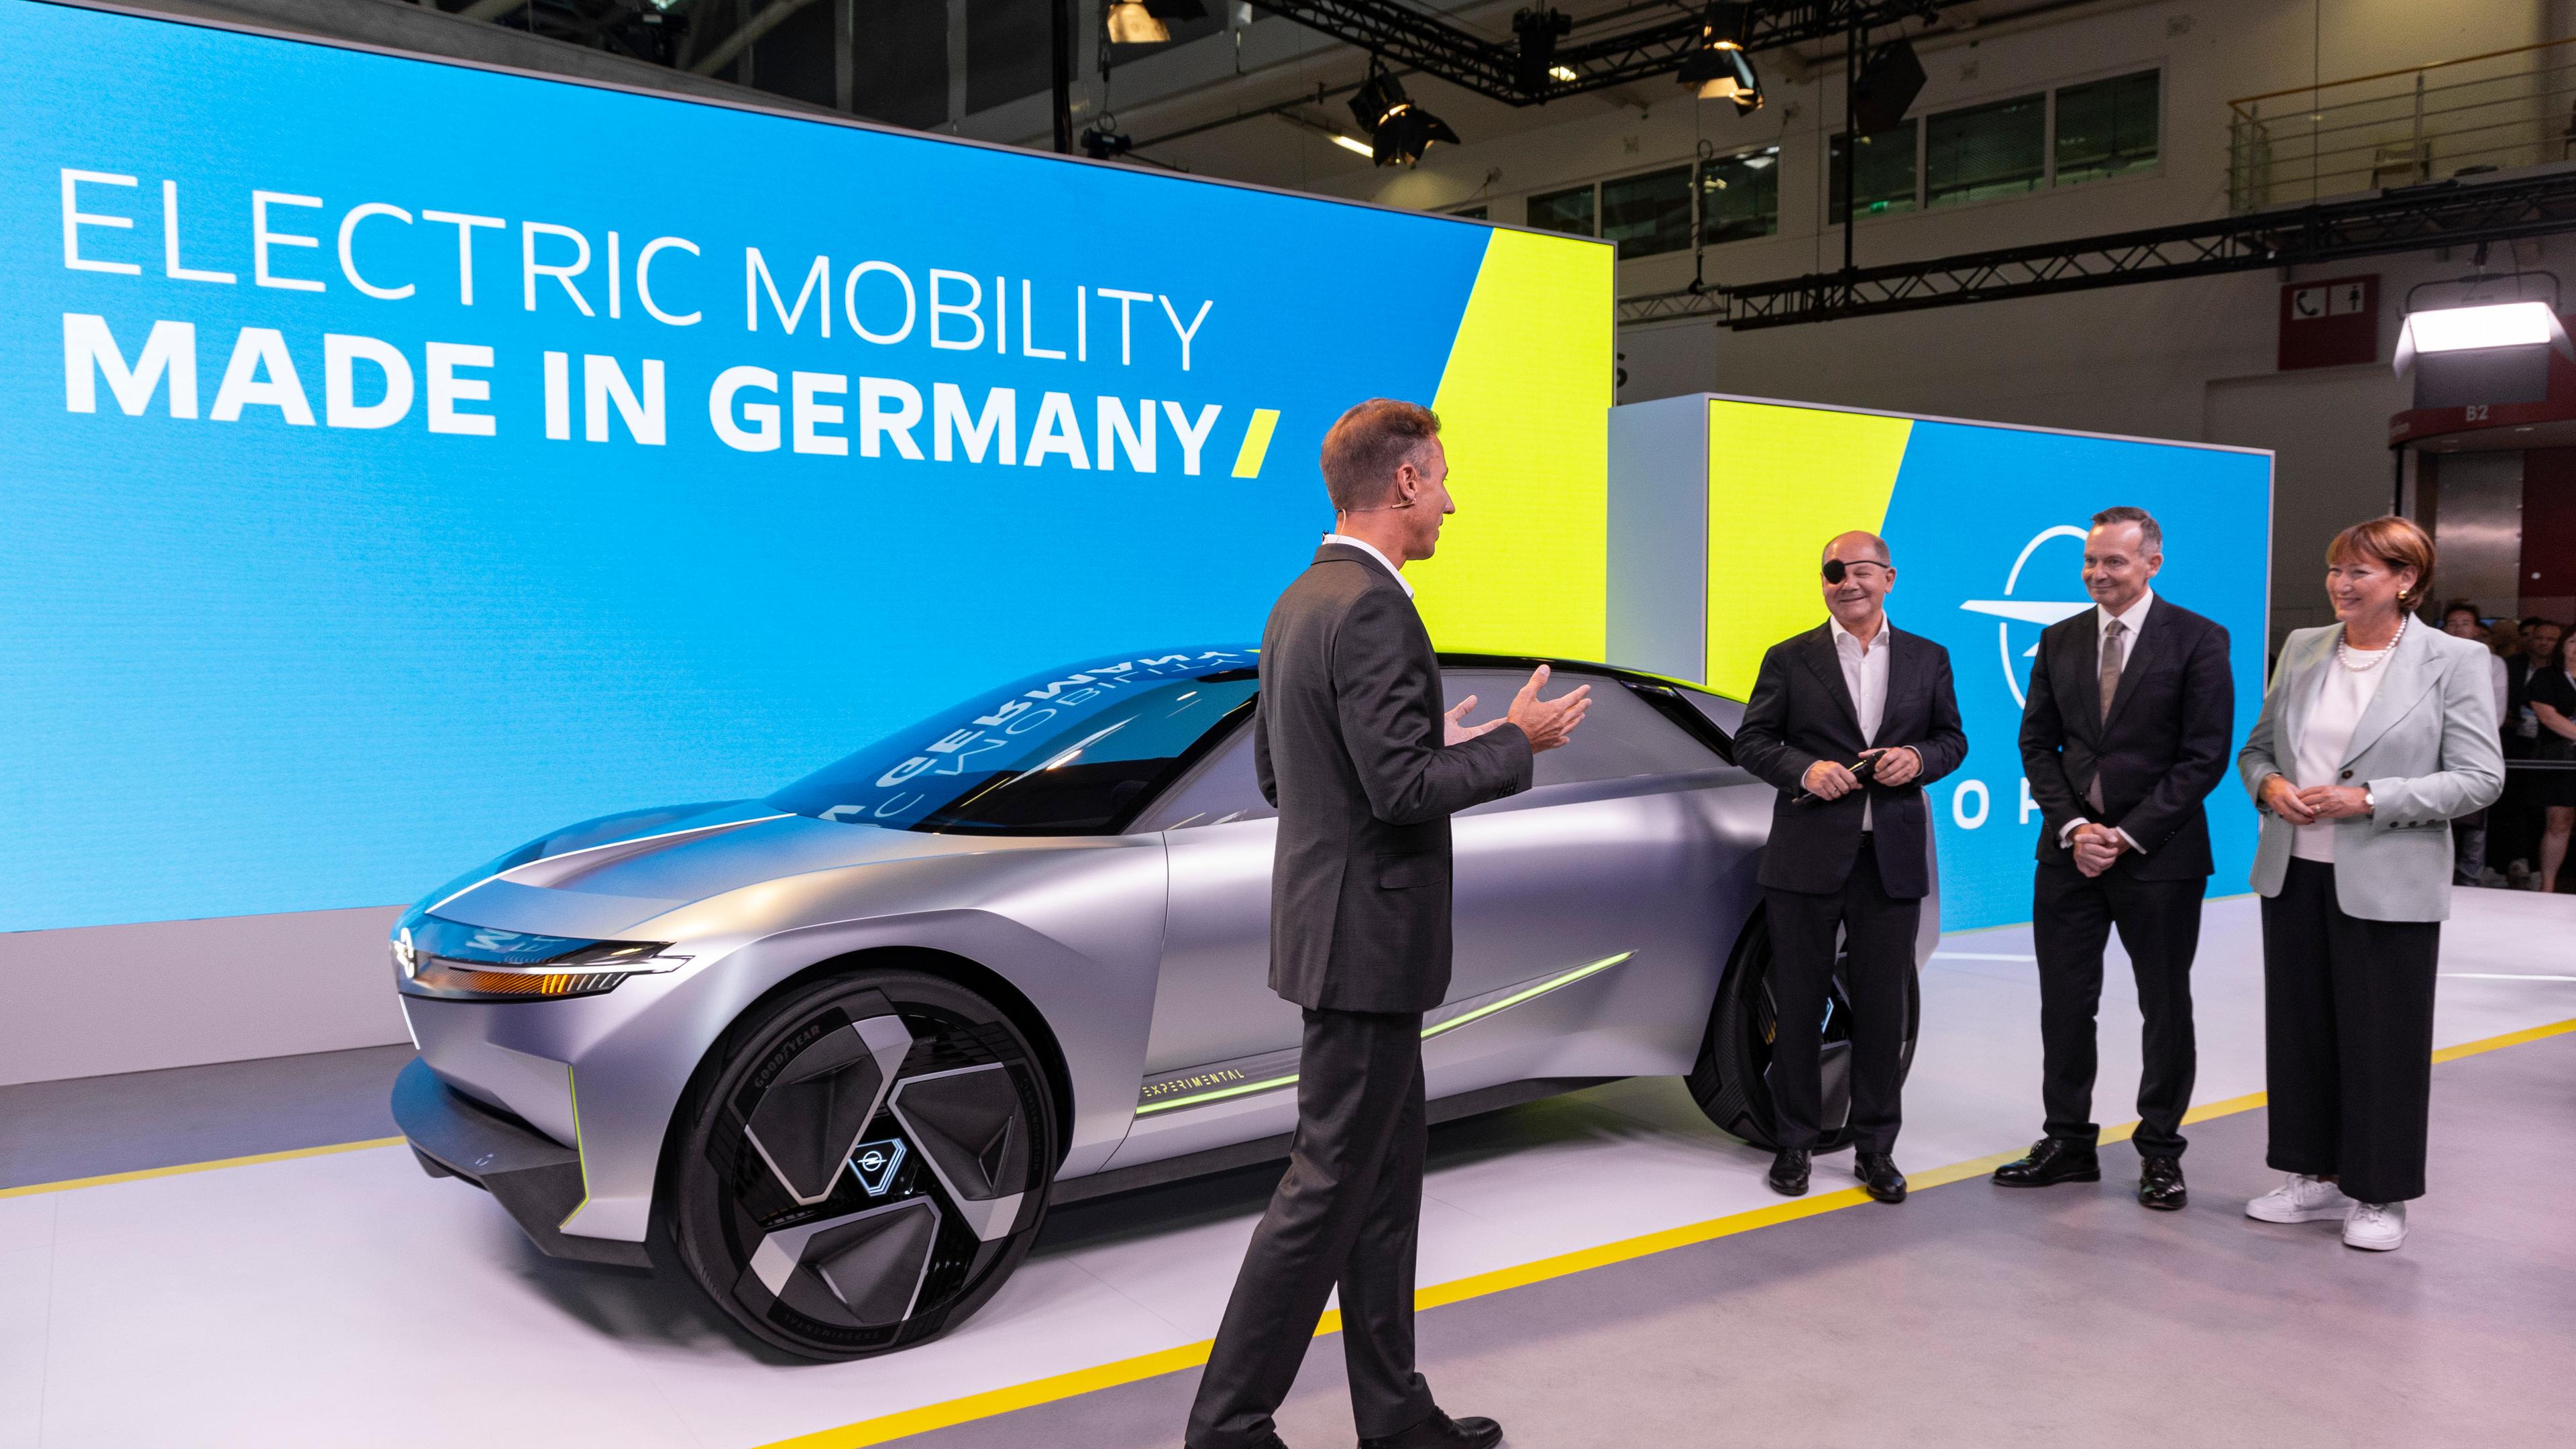 Olaf Scholz besucht die IAA-Mobility